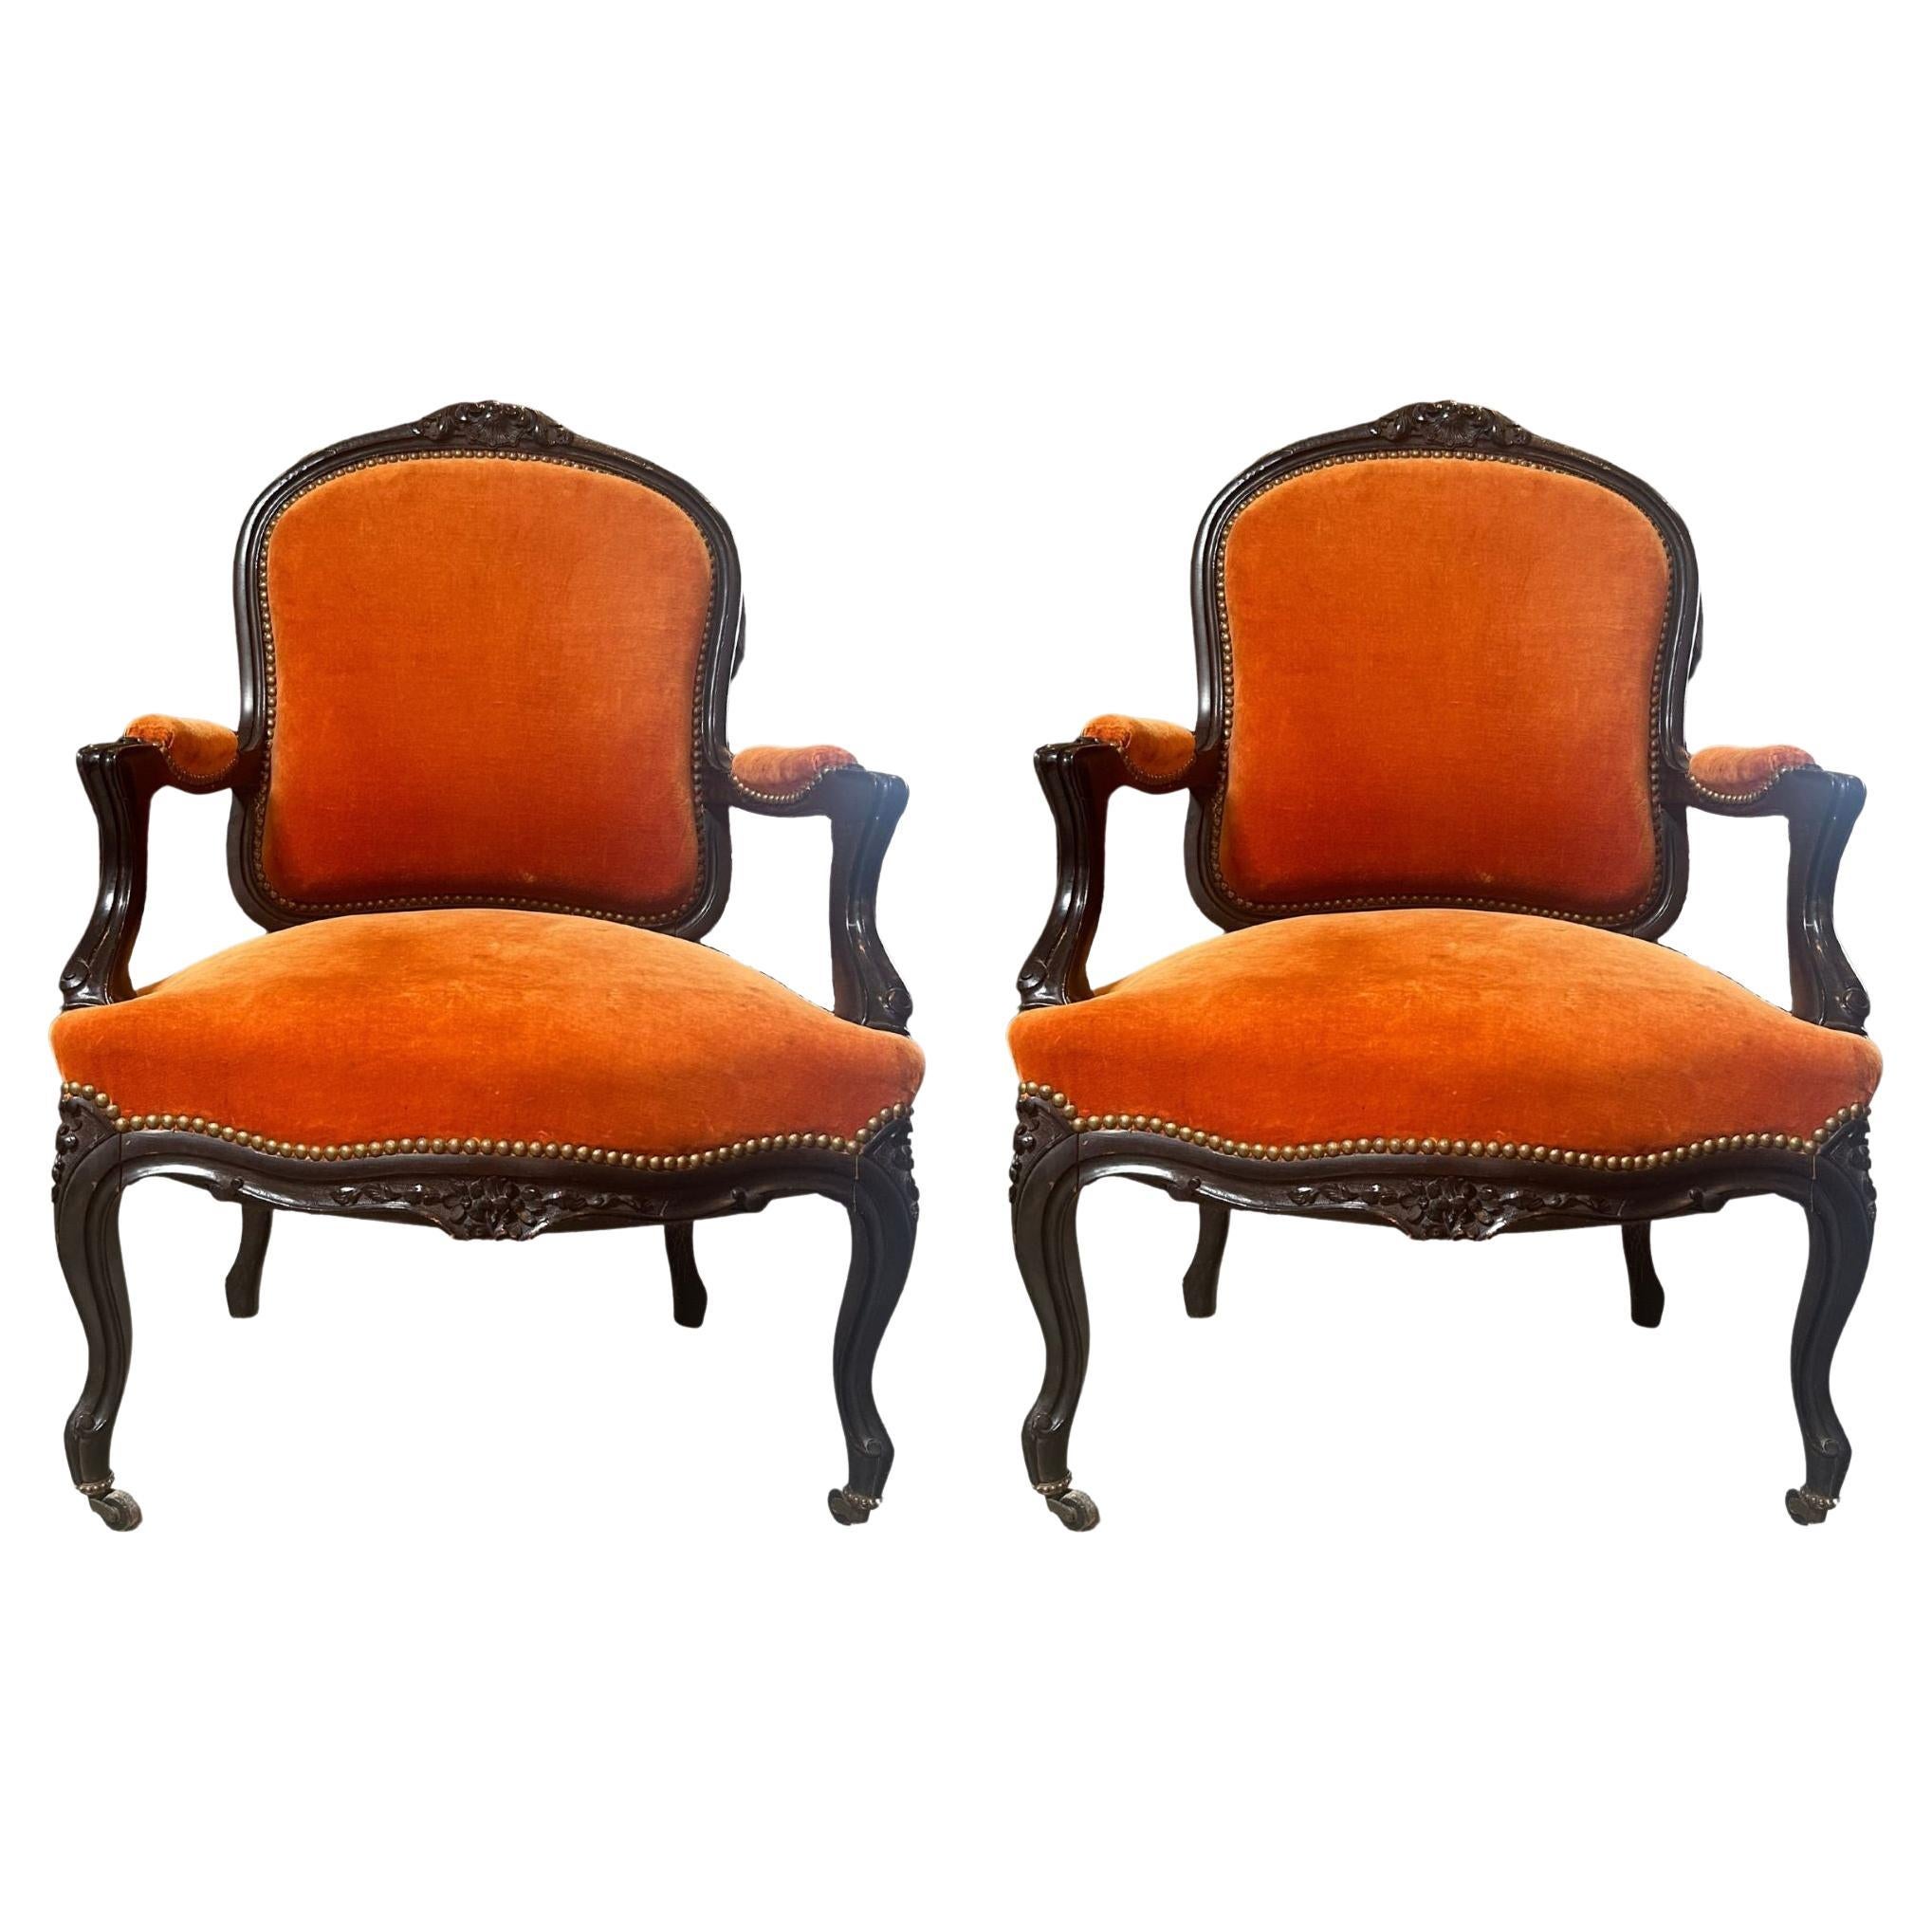 French 19th Century Chairs with Original Black Patina - Set of 2 For Sale